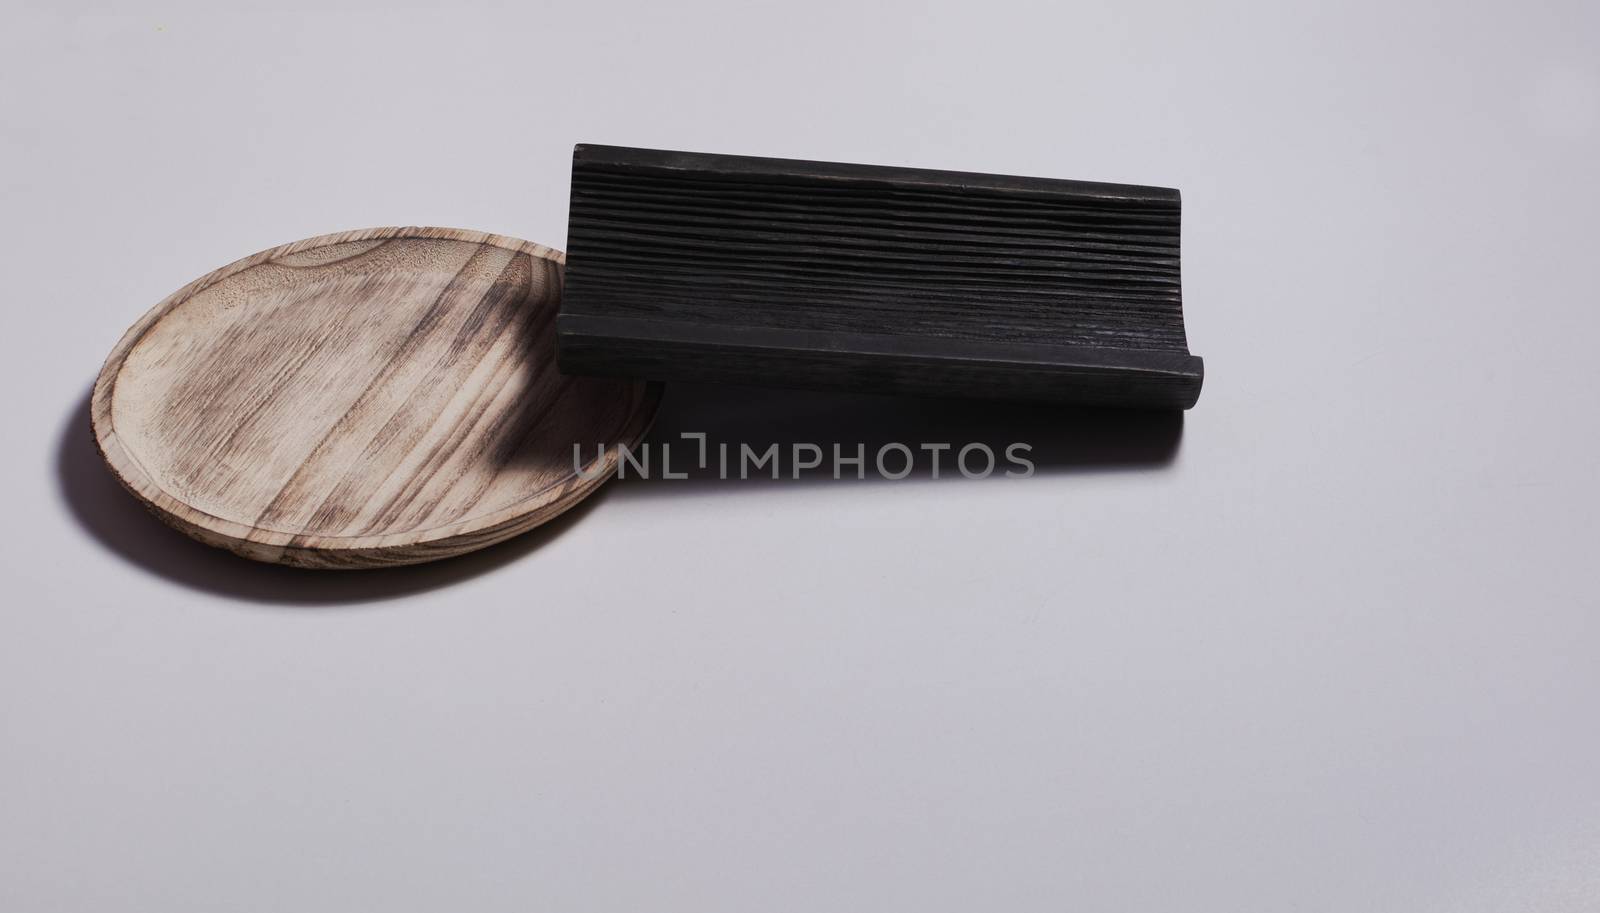 Wooden plate with a wooden tile on white background. Colors of nature